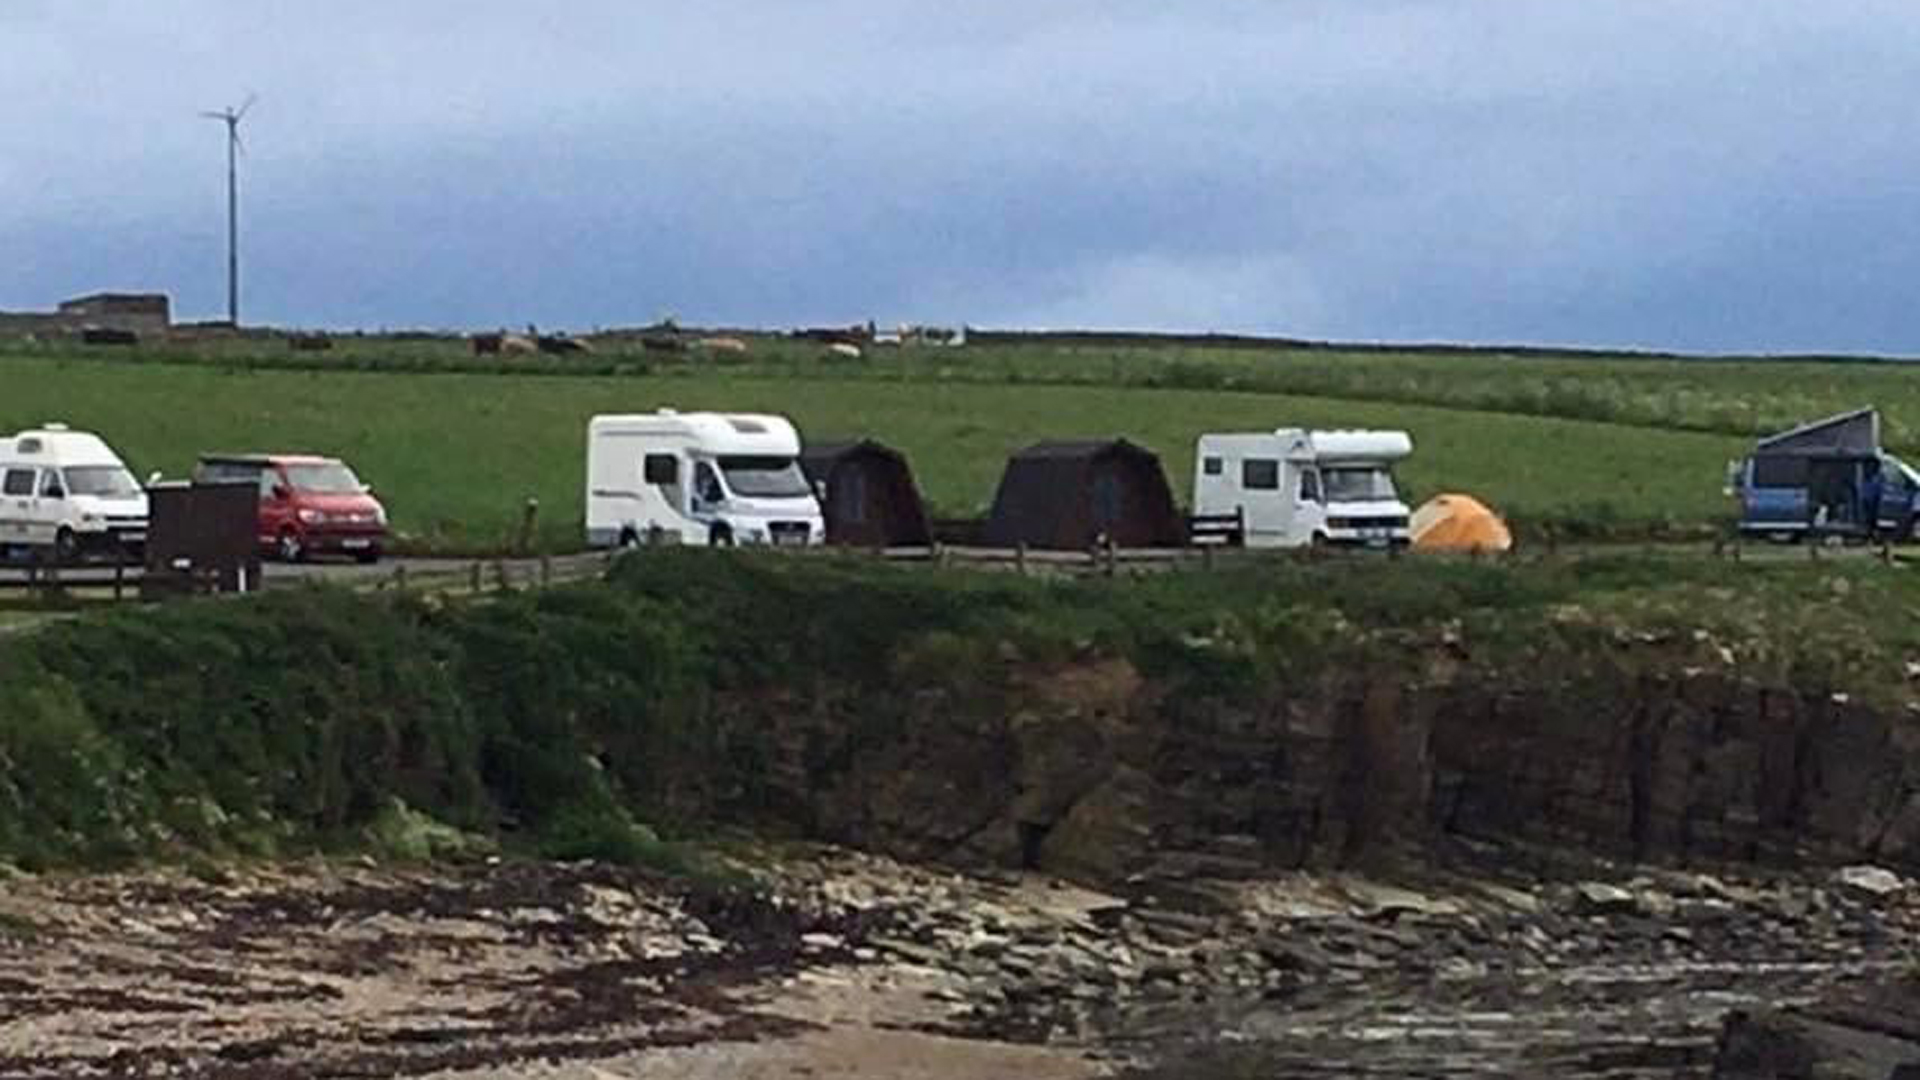 Sanday - Ayre - The Camping and Caravanning Club